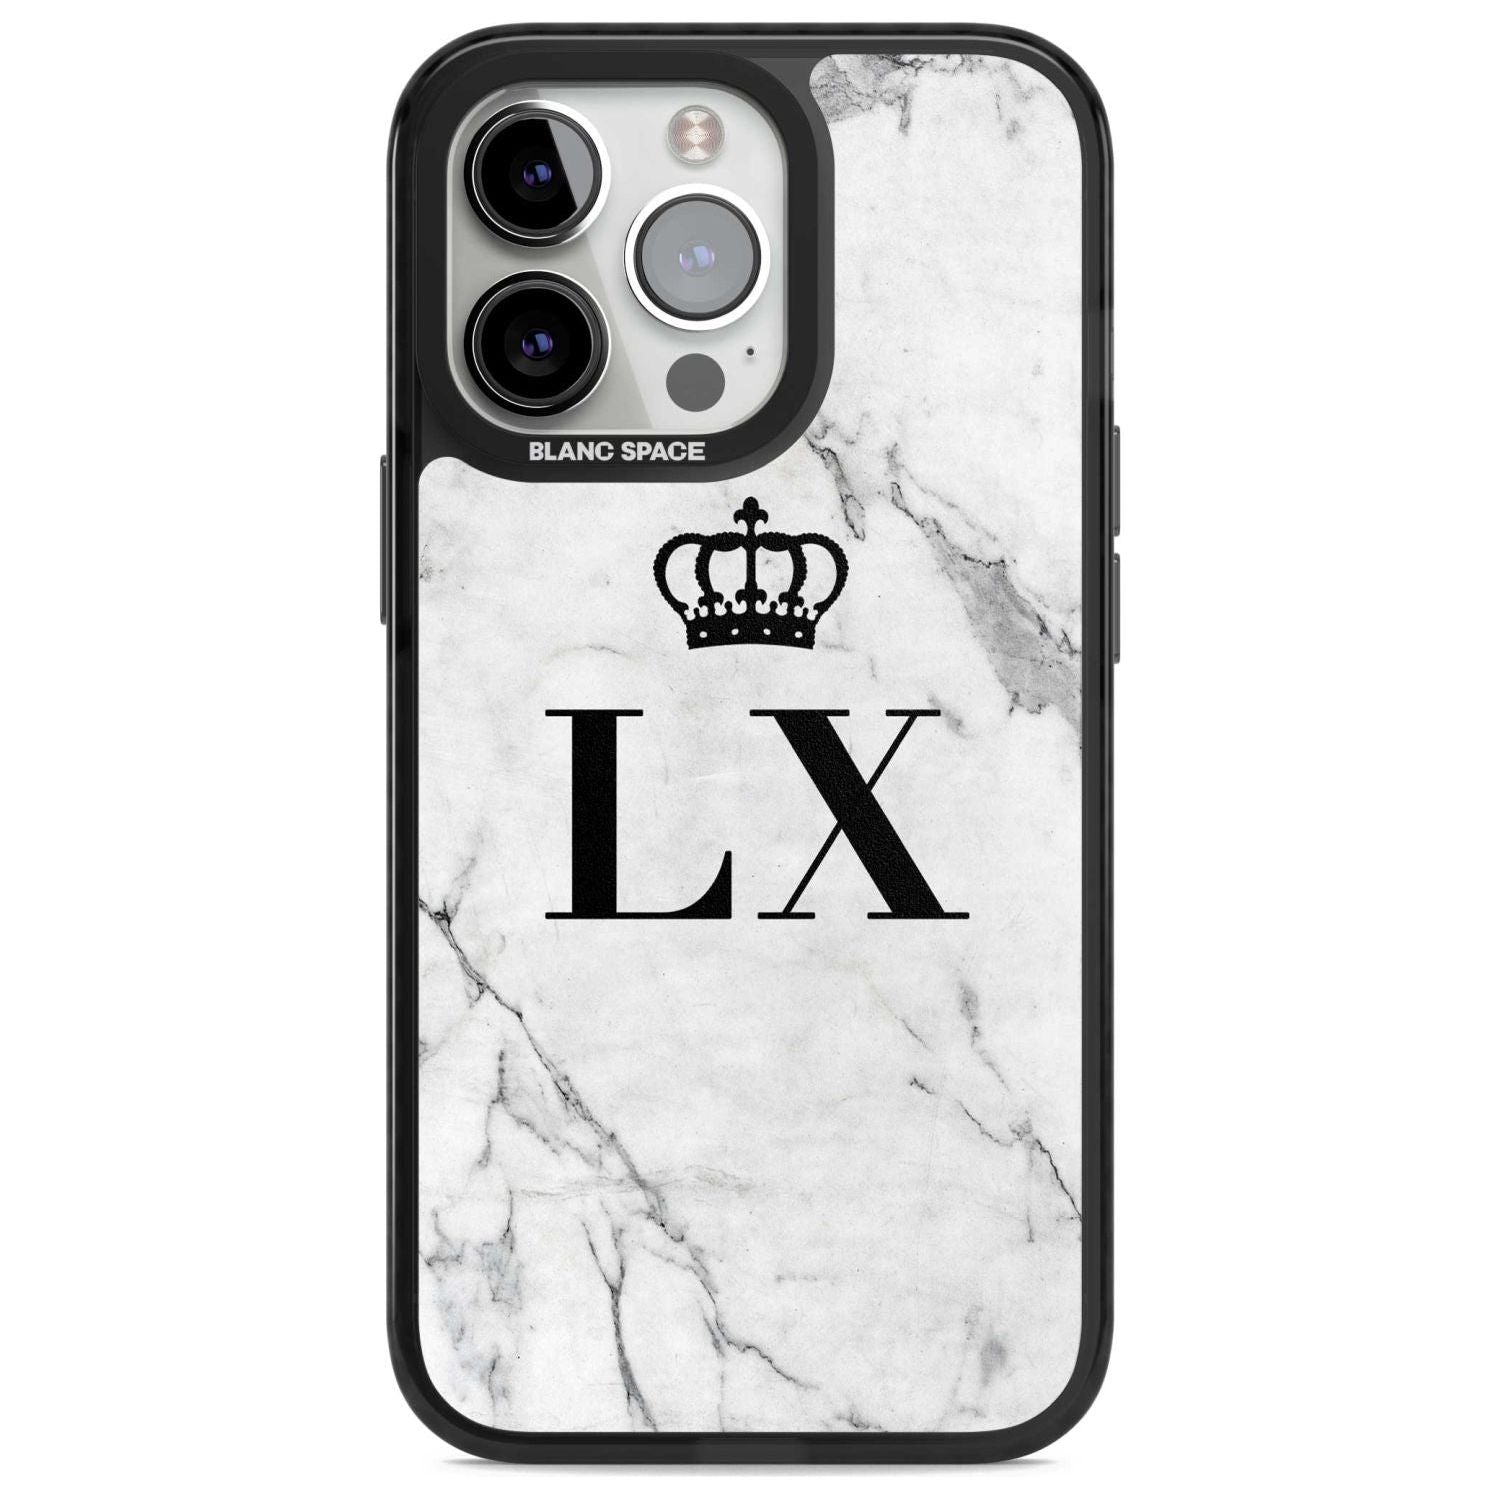 Personalised Initials with Crown on White Marble Custom Phone Case iPhone 15 Pro Max / Magsafe Black Impact Case,iPhone 15 Pro / Magsafe Black Impact Case,iPhone 14 Pro Max / Magsafe Black Impact Case,iPhone 14 Pro / Magsafe Black Impact Case,iPhone 13 Pro / Magsafe Black Impact Case Blanc Space